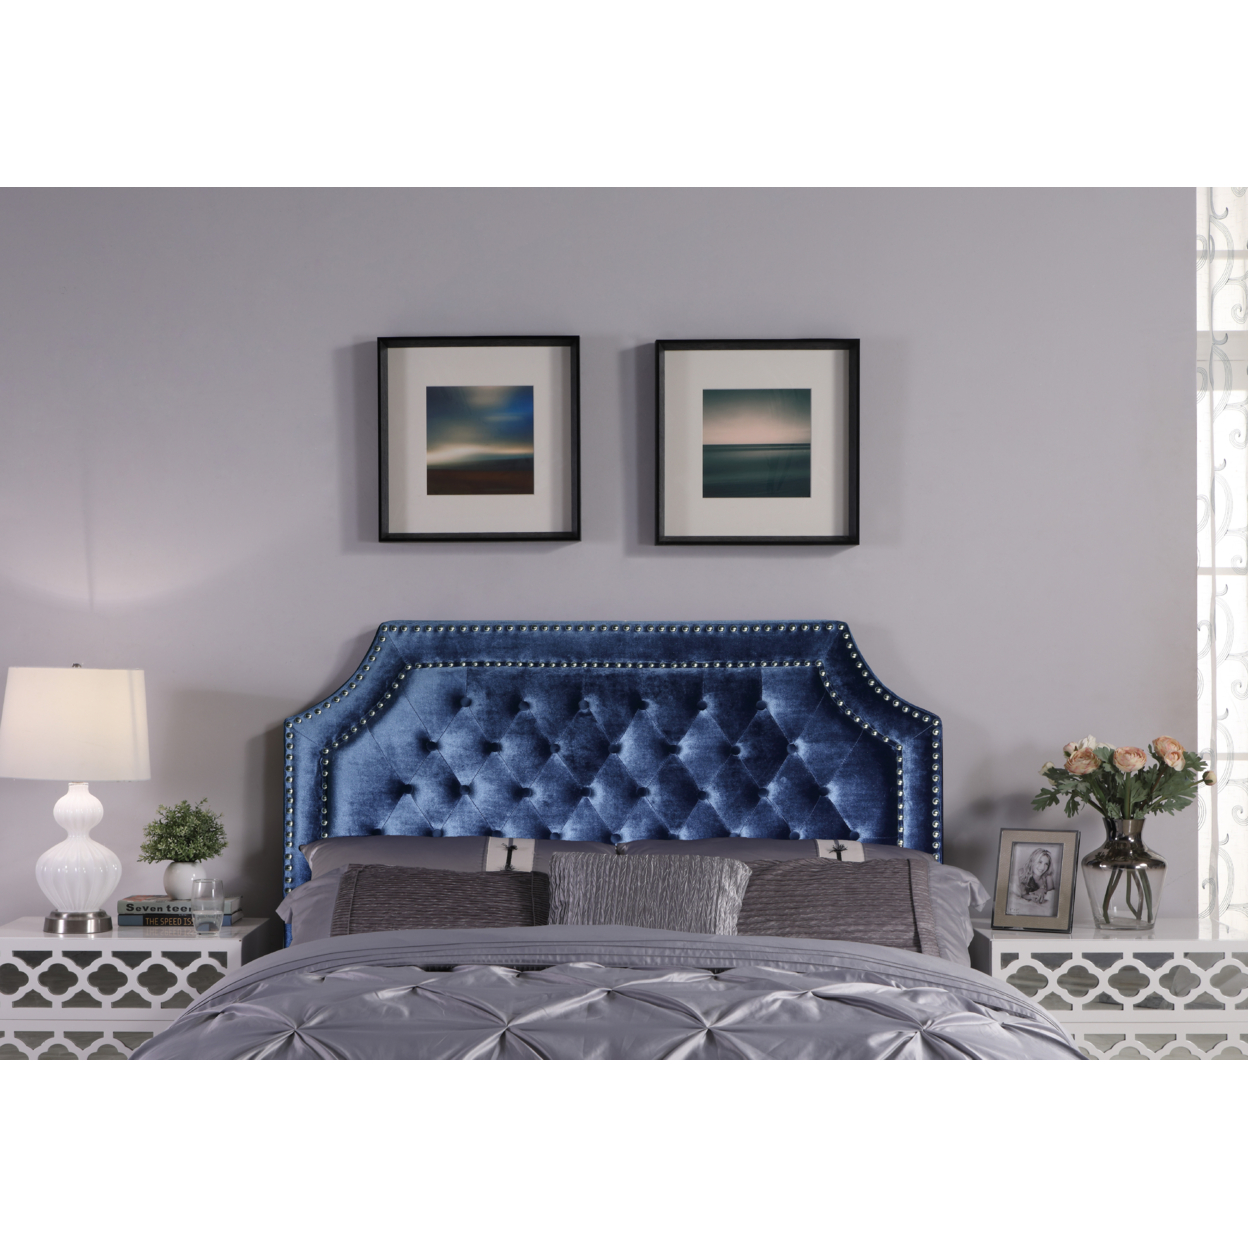 Horus Headboard Velvet Upholstered Button Tufted Double Row Silver Nailhead Trim - Taupe, Queen